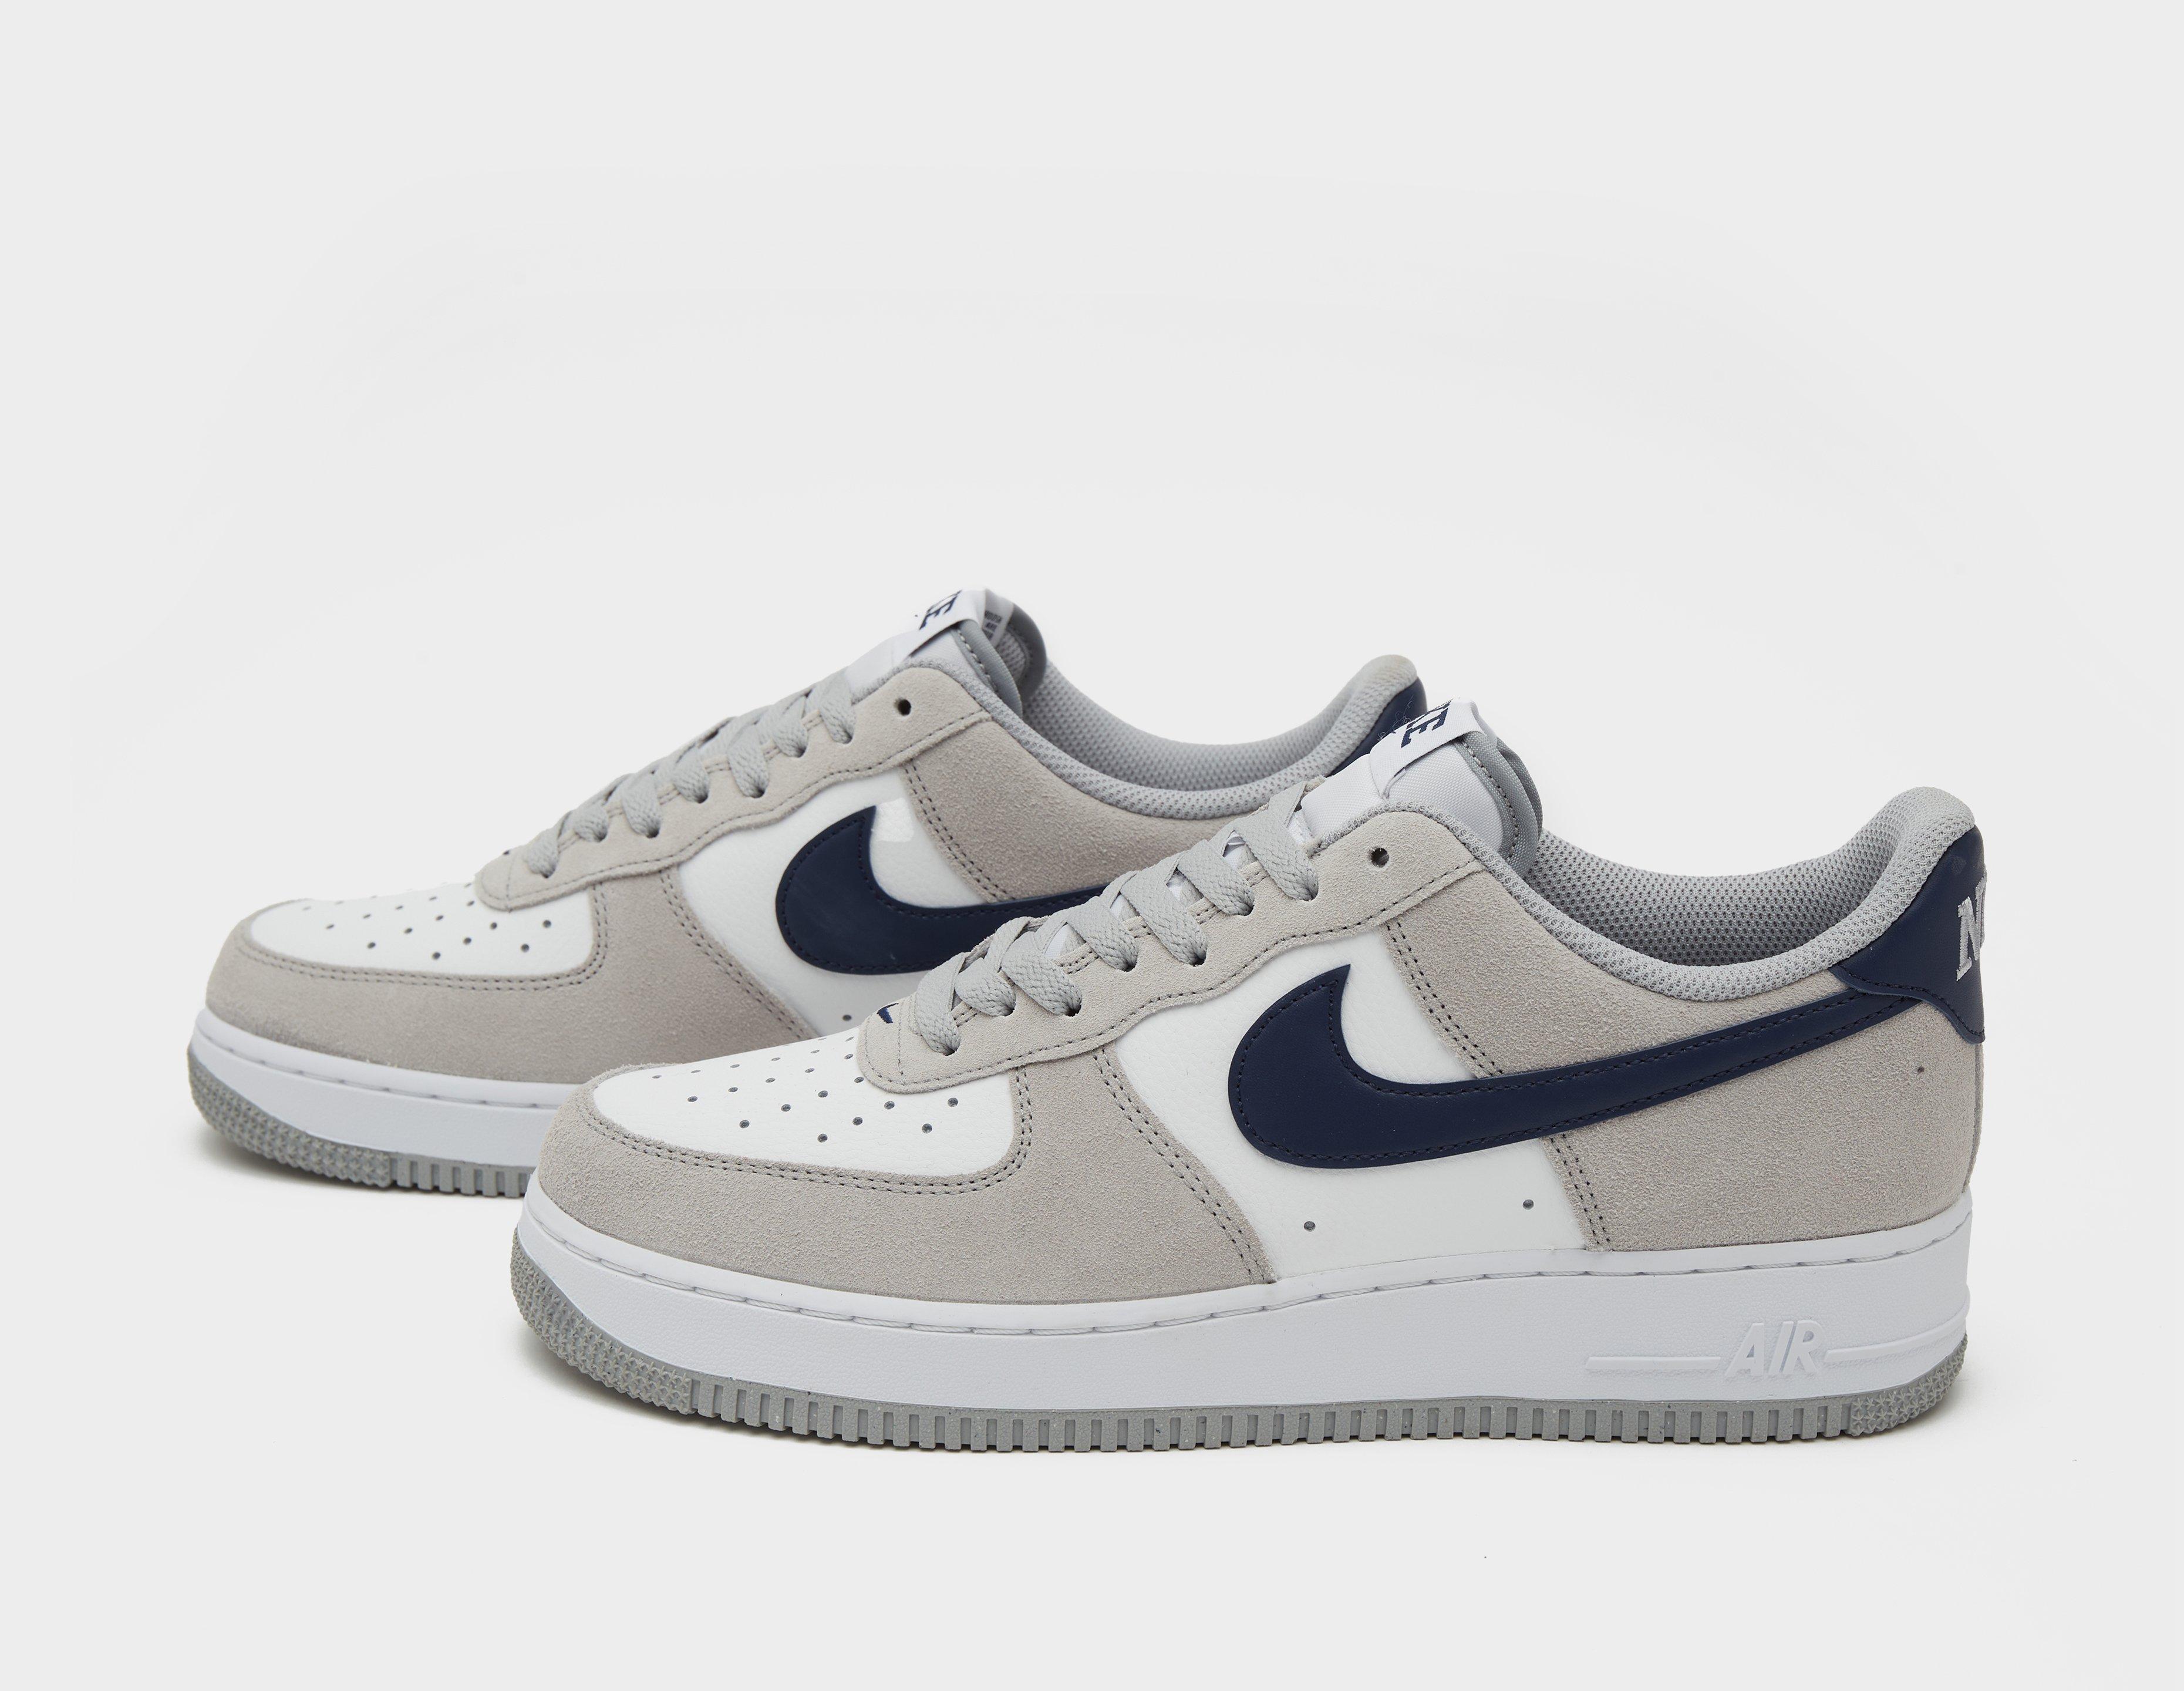 Leninisme Reusachtig Morse code Here is yet another Nike Air Force 1 Ones classic